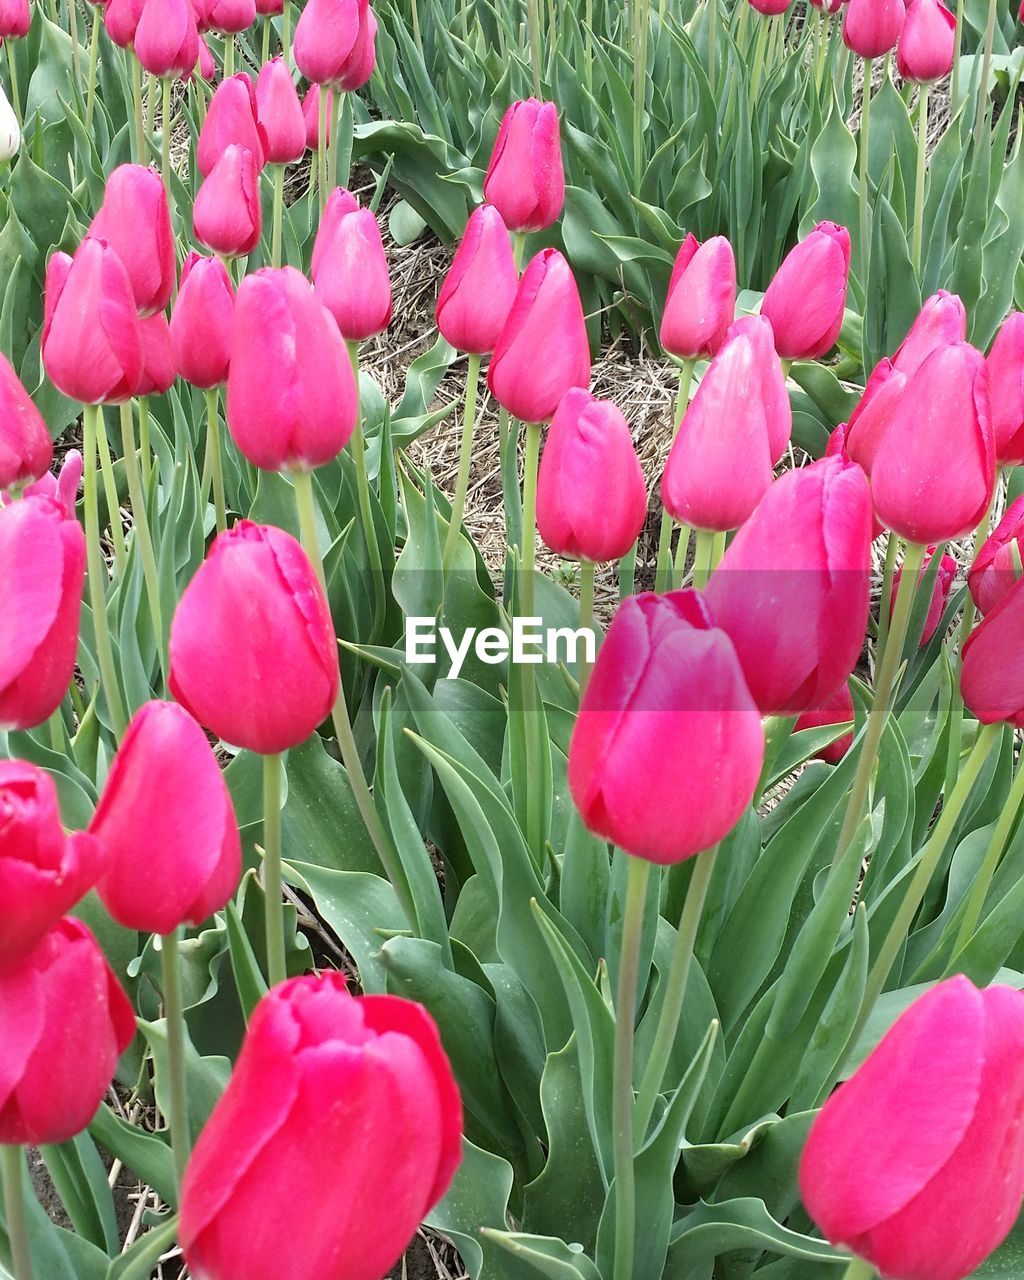 PINK TULIPS BLOOMING IN PARK